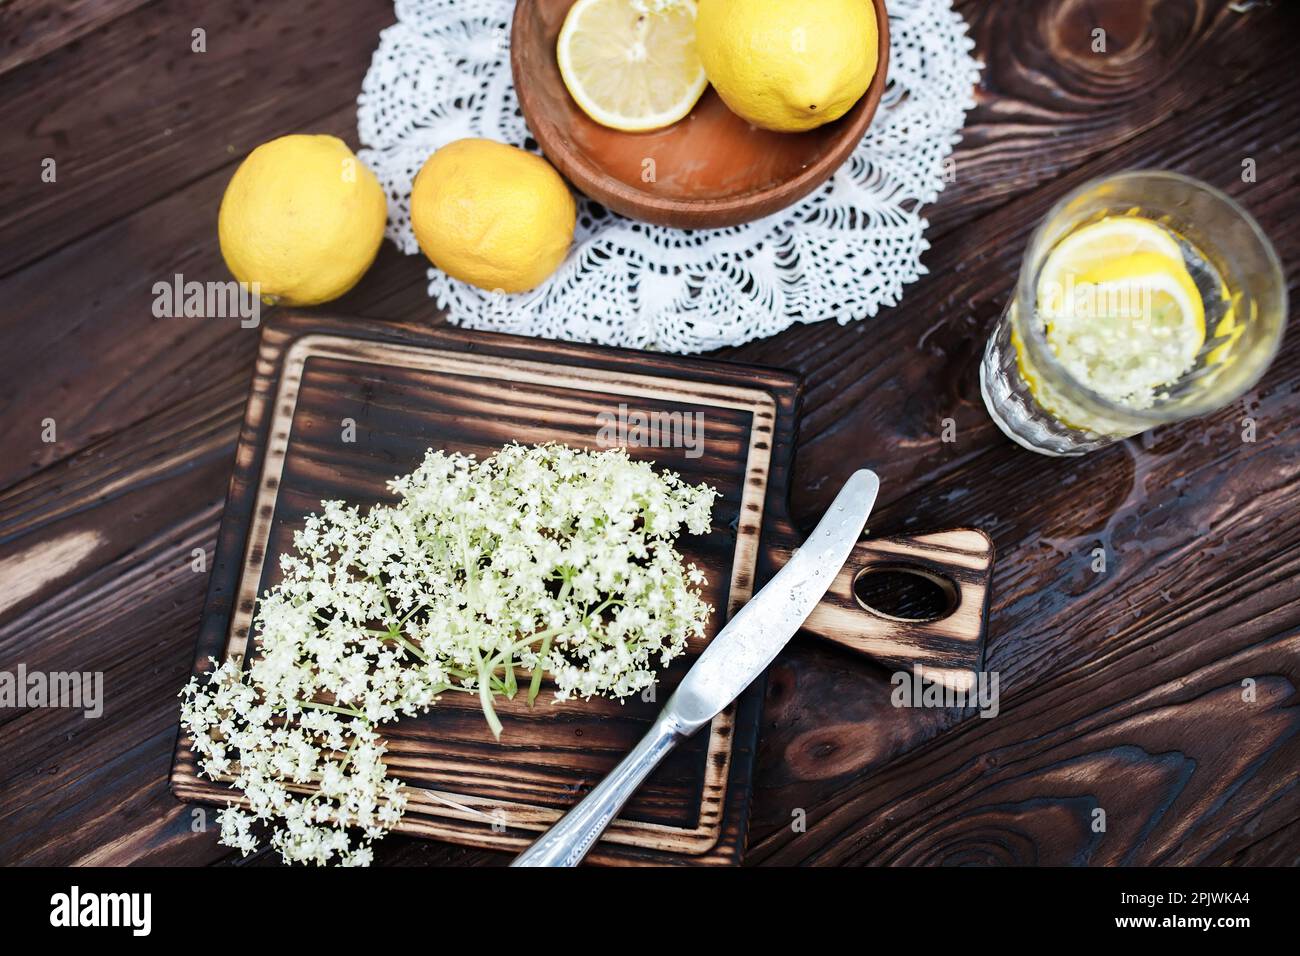 Grinding lemon and black elderberry on a cutting board to make an herbal drink or medicine for healing at home from syrup from elderberry flowers. Stock Photo